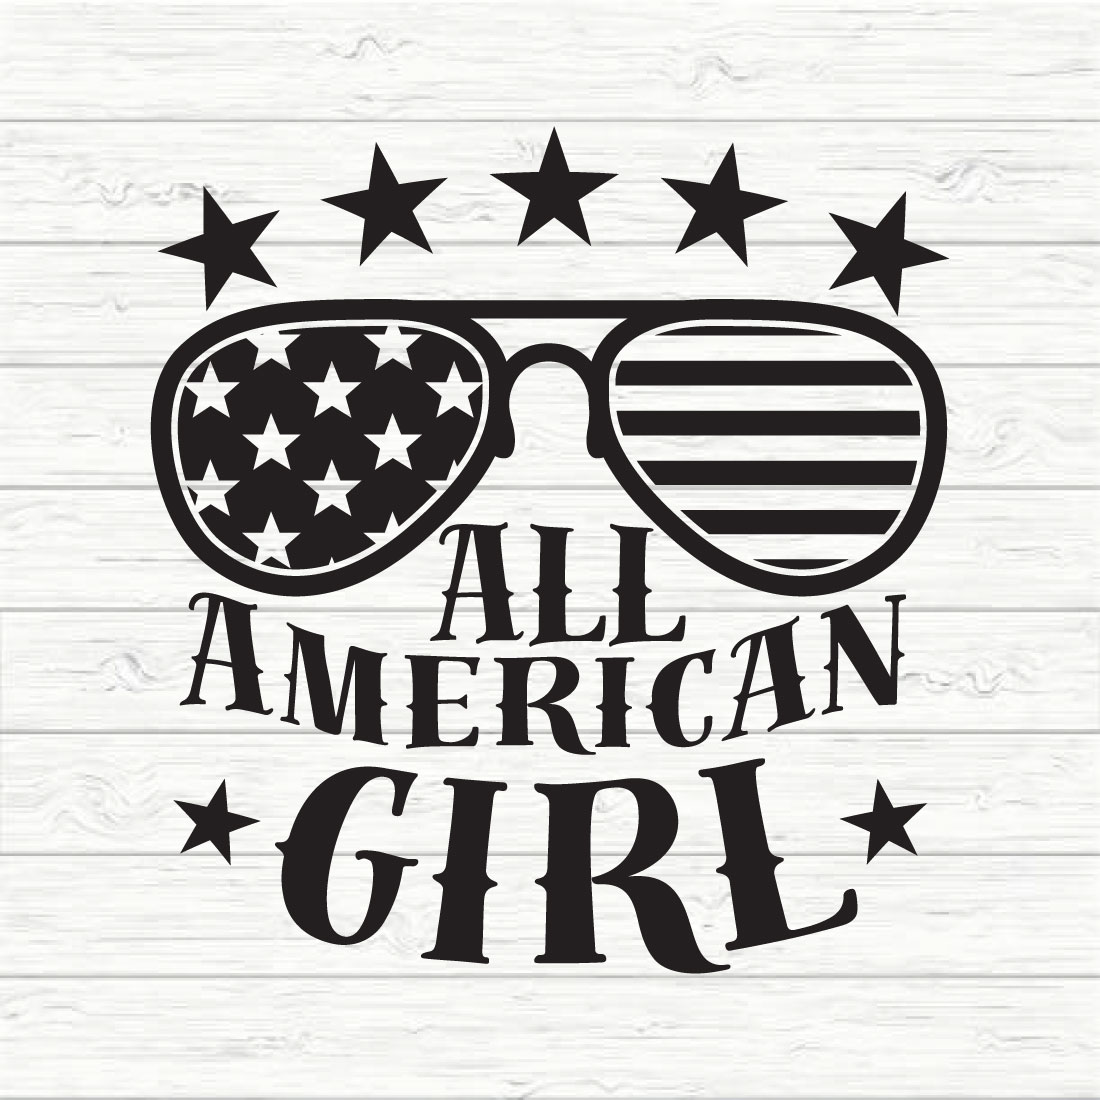 All American Girl preview image.